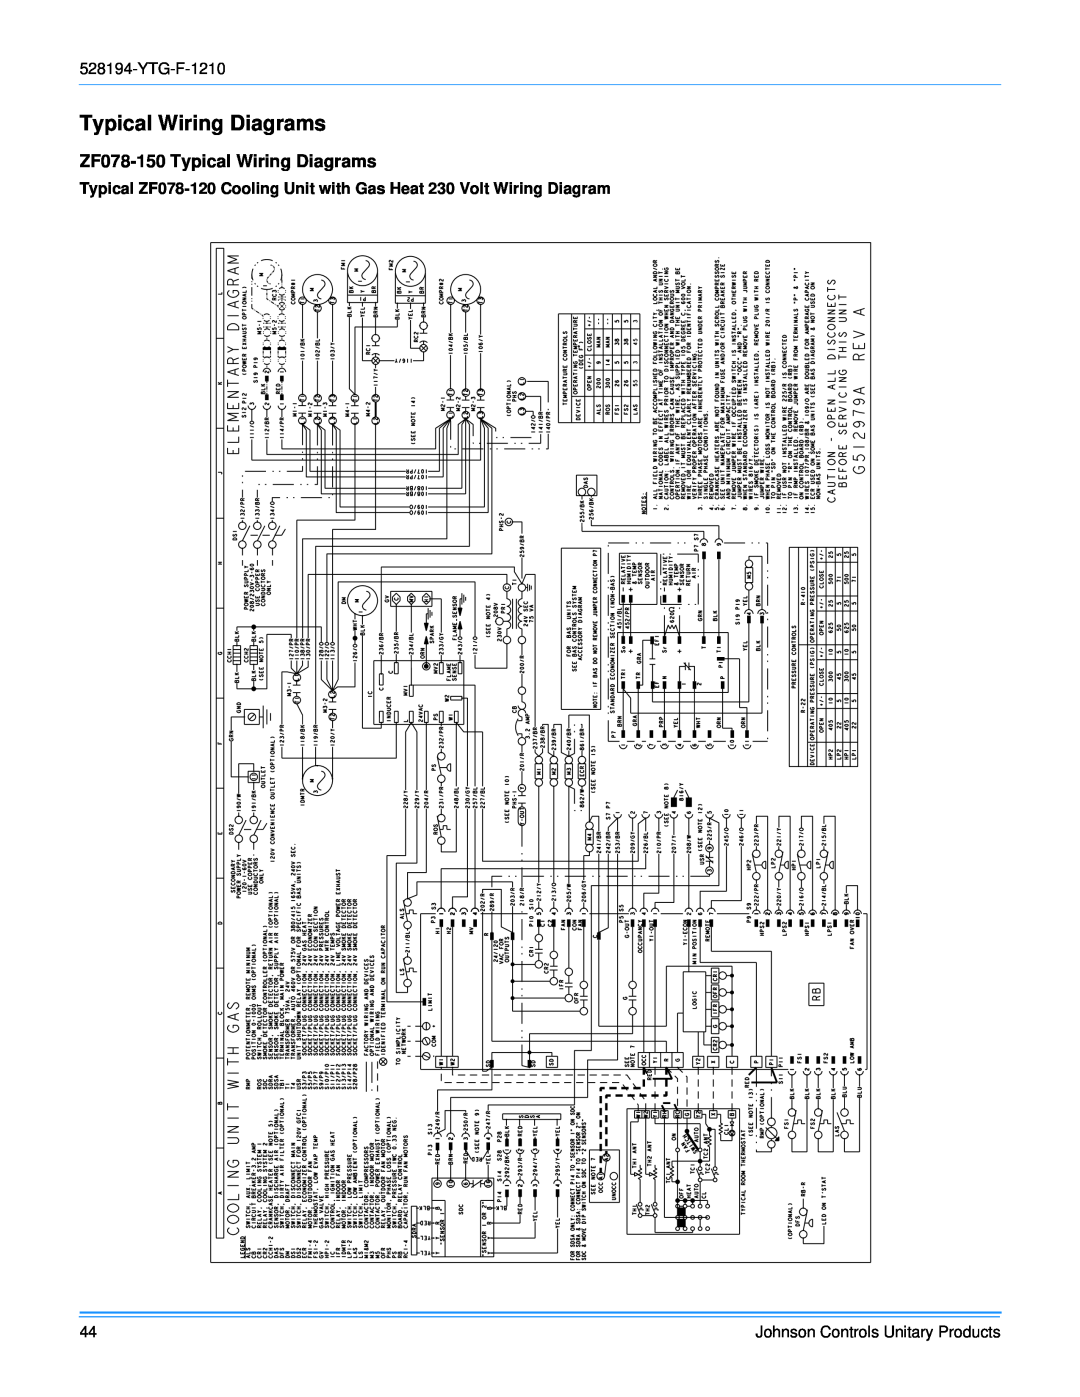 York R-410A manual ZF078-150Typical Wiring Diagrams 